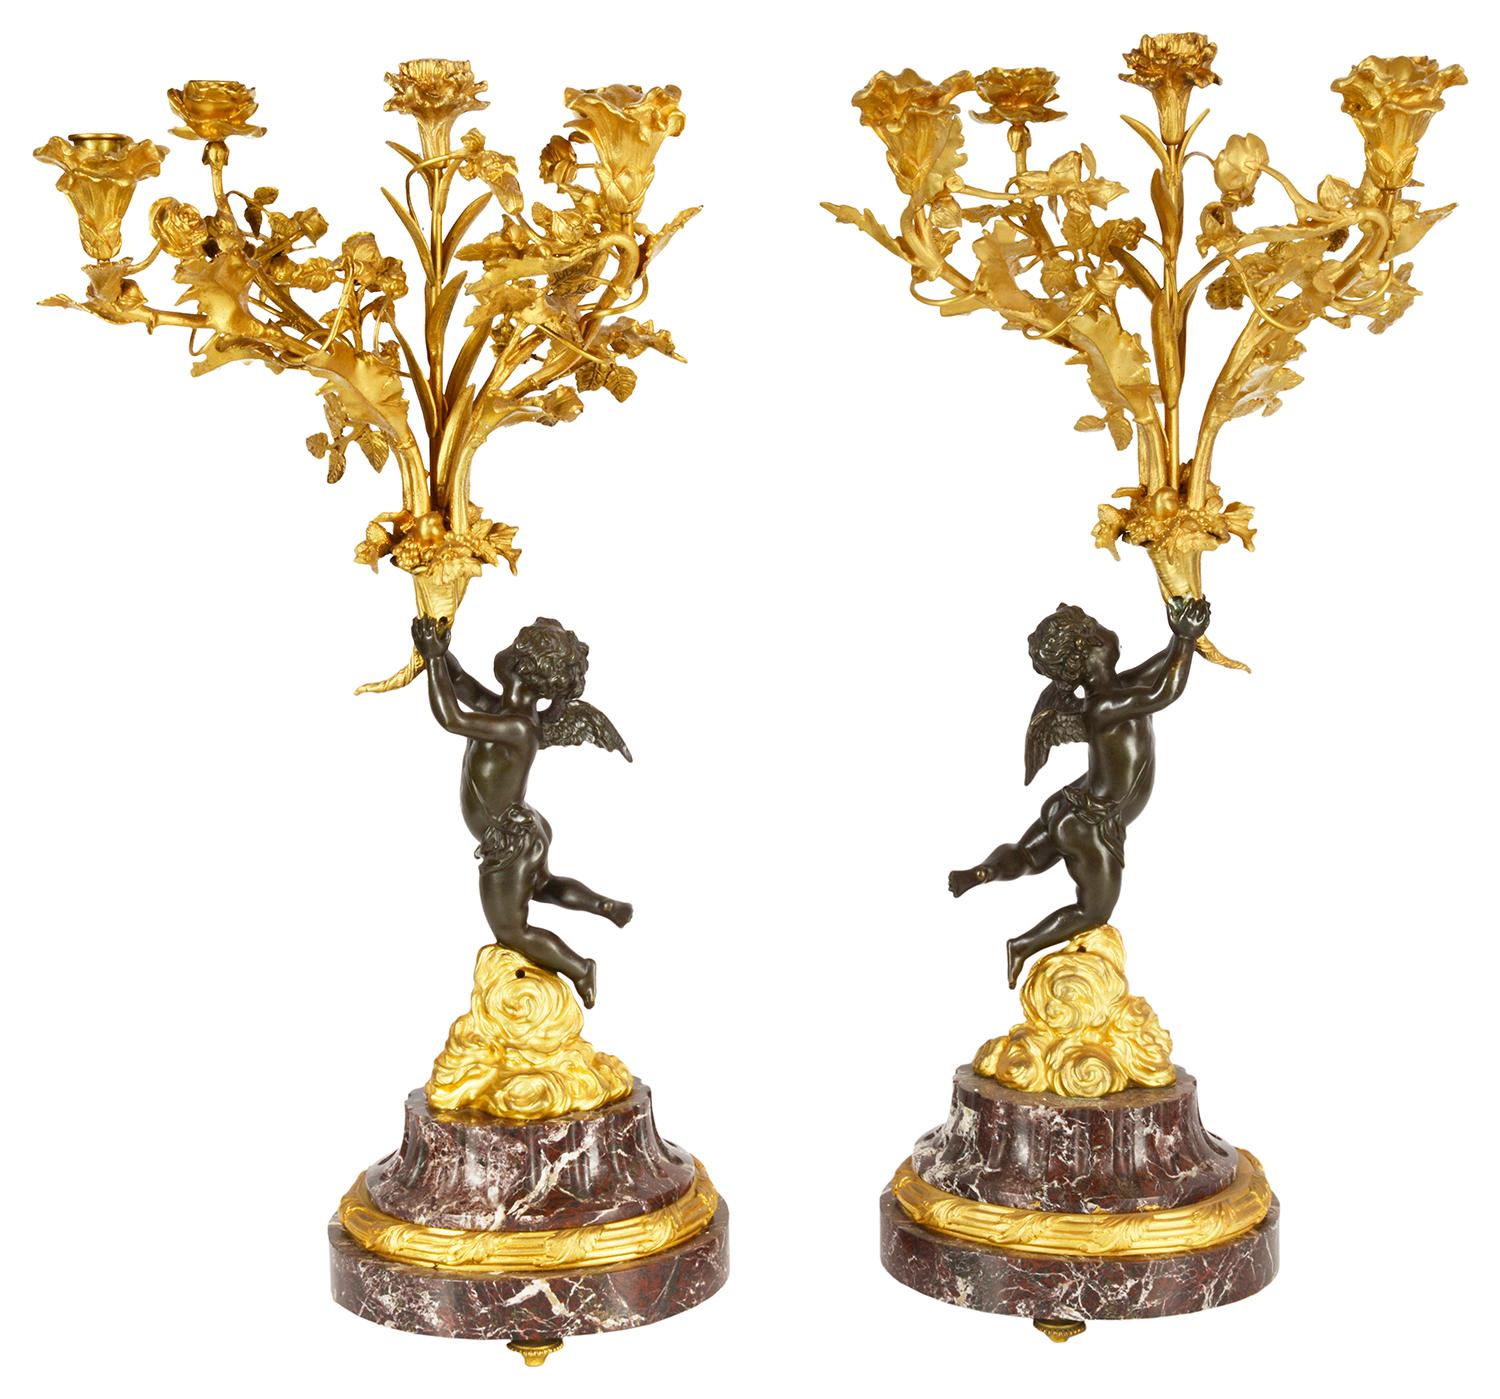 A good quality large pair of French Louis XVI style candelabra. Each having 5 branch gilded ormolu sconces with flowers and leaf decoration, supported by a pair of bronze patinated winged cherubs on clouds and mounted on rouge marble fluted bases.